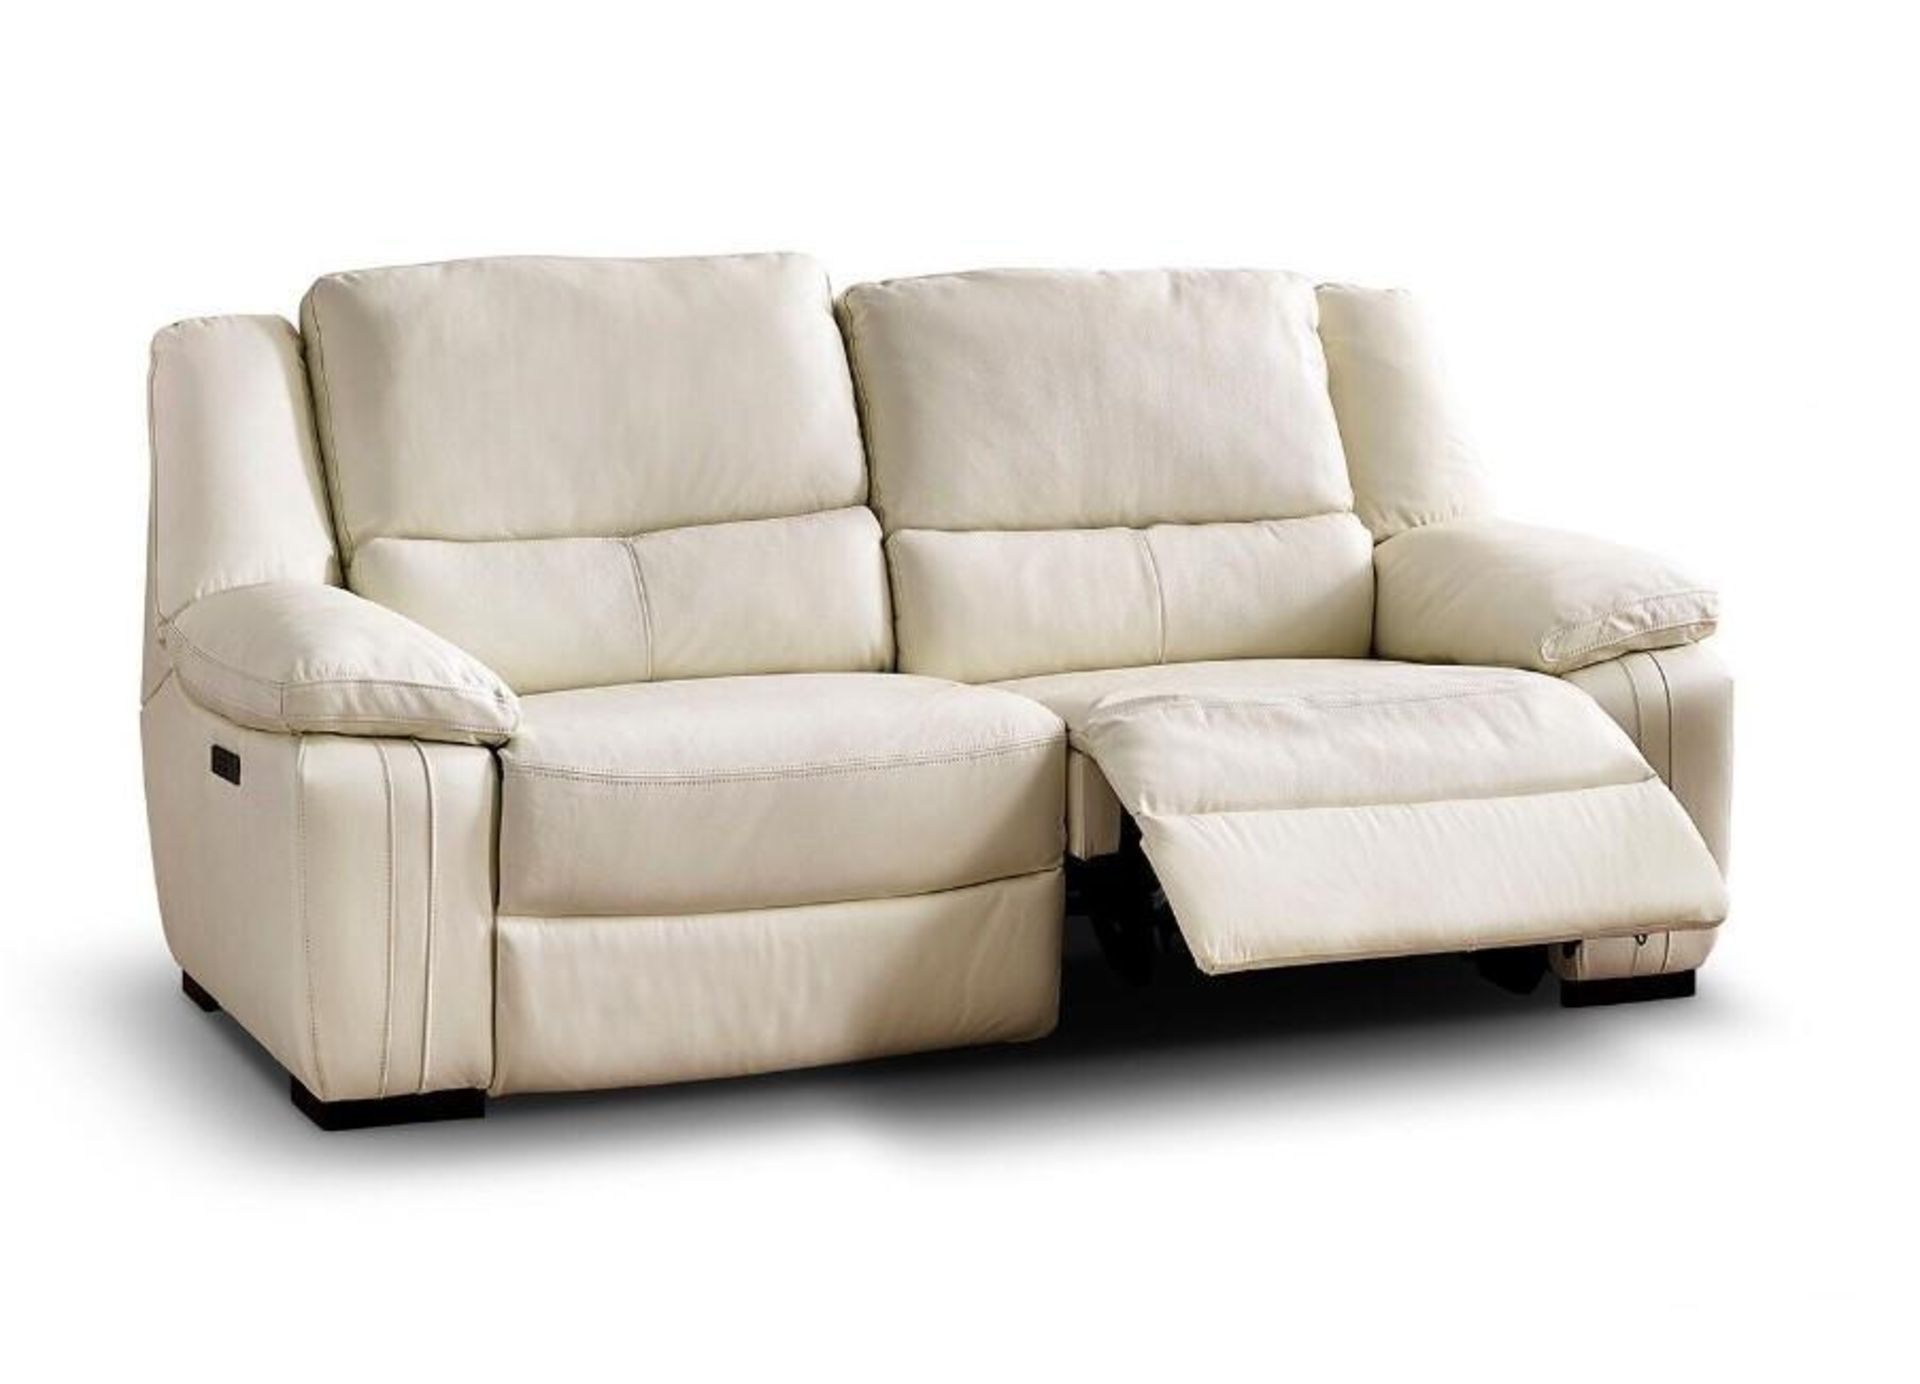 Brand new and boxed SCS Fallon 3 seater electric reclining sofa in Cream. - Image 6 of 7